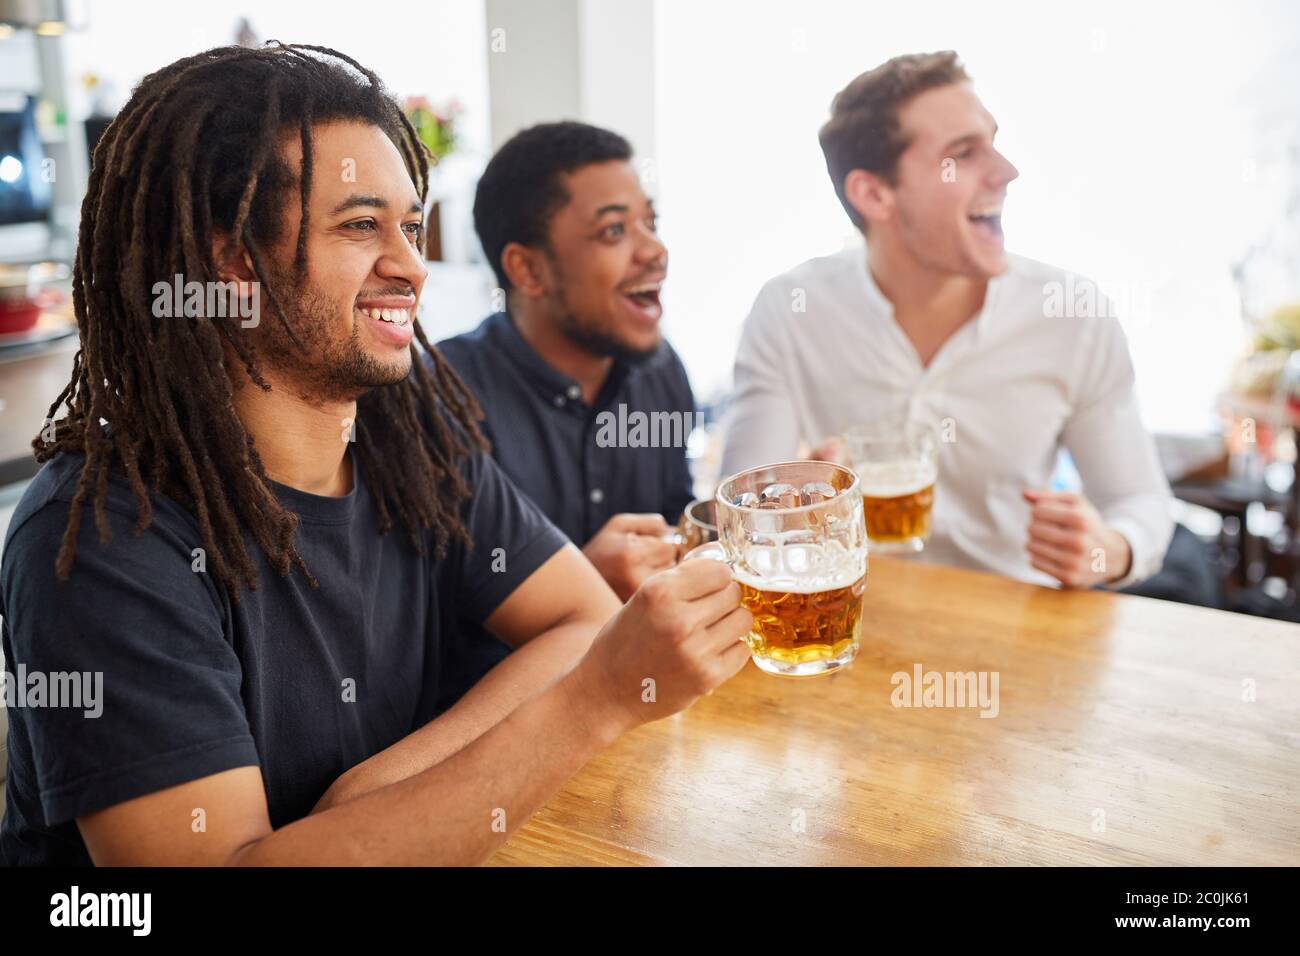 Three men as friends drink beer and watch a soccer game on TV together Stock Photo